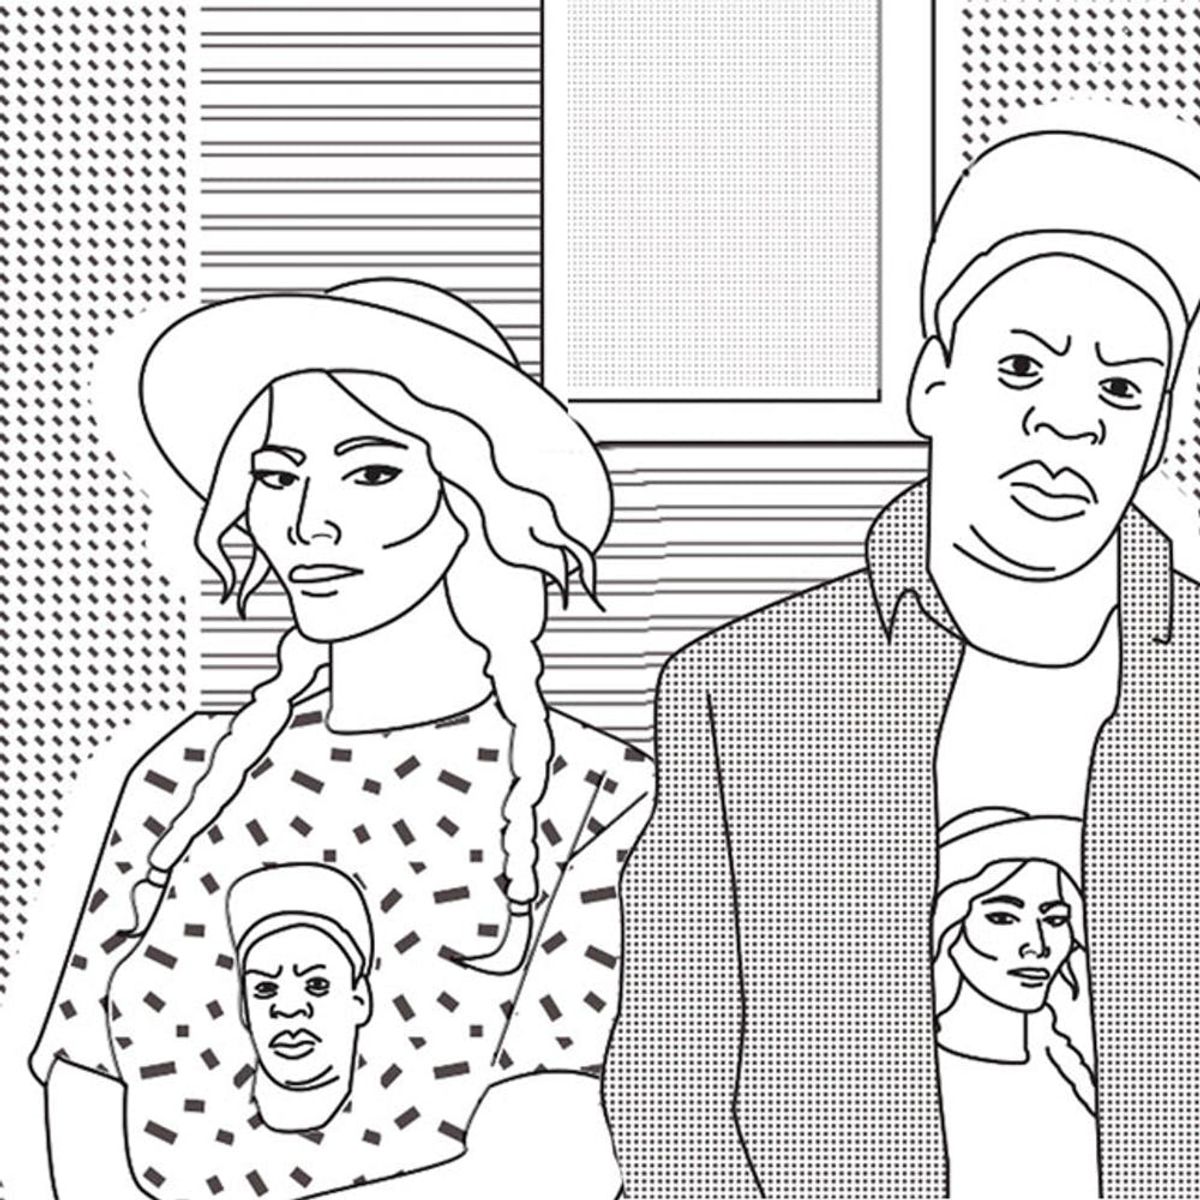 Get Your Pop Culture Fix With This Adult Coloring Book Full of Celebrity Couples